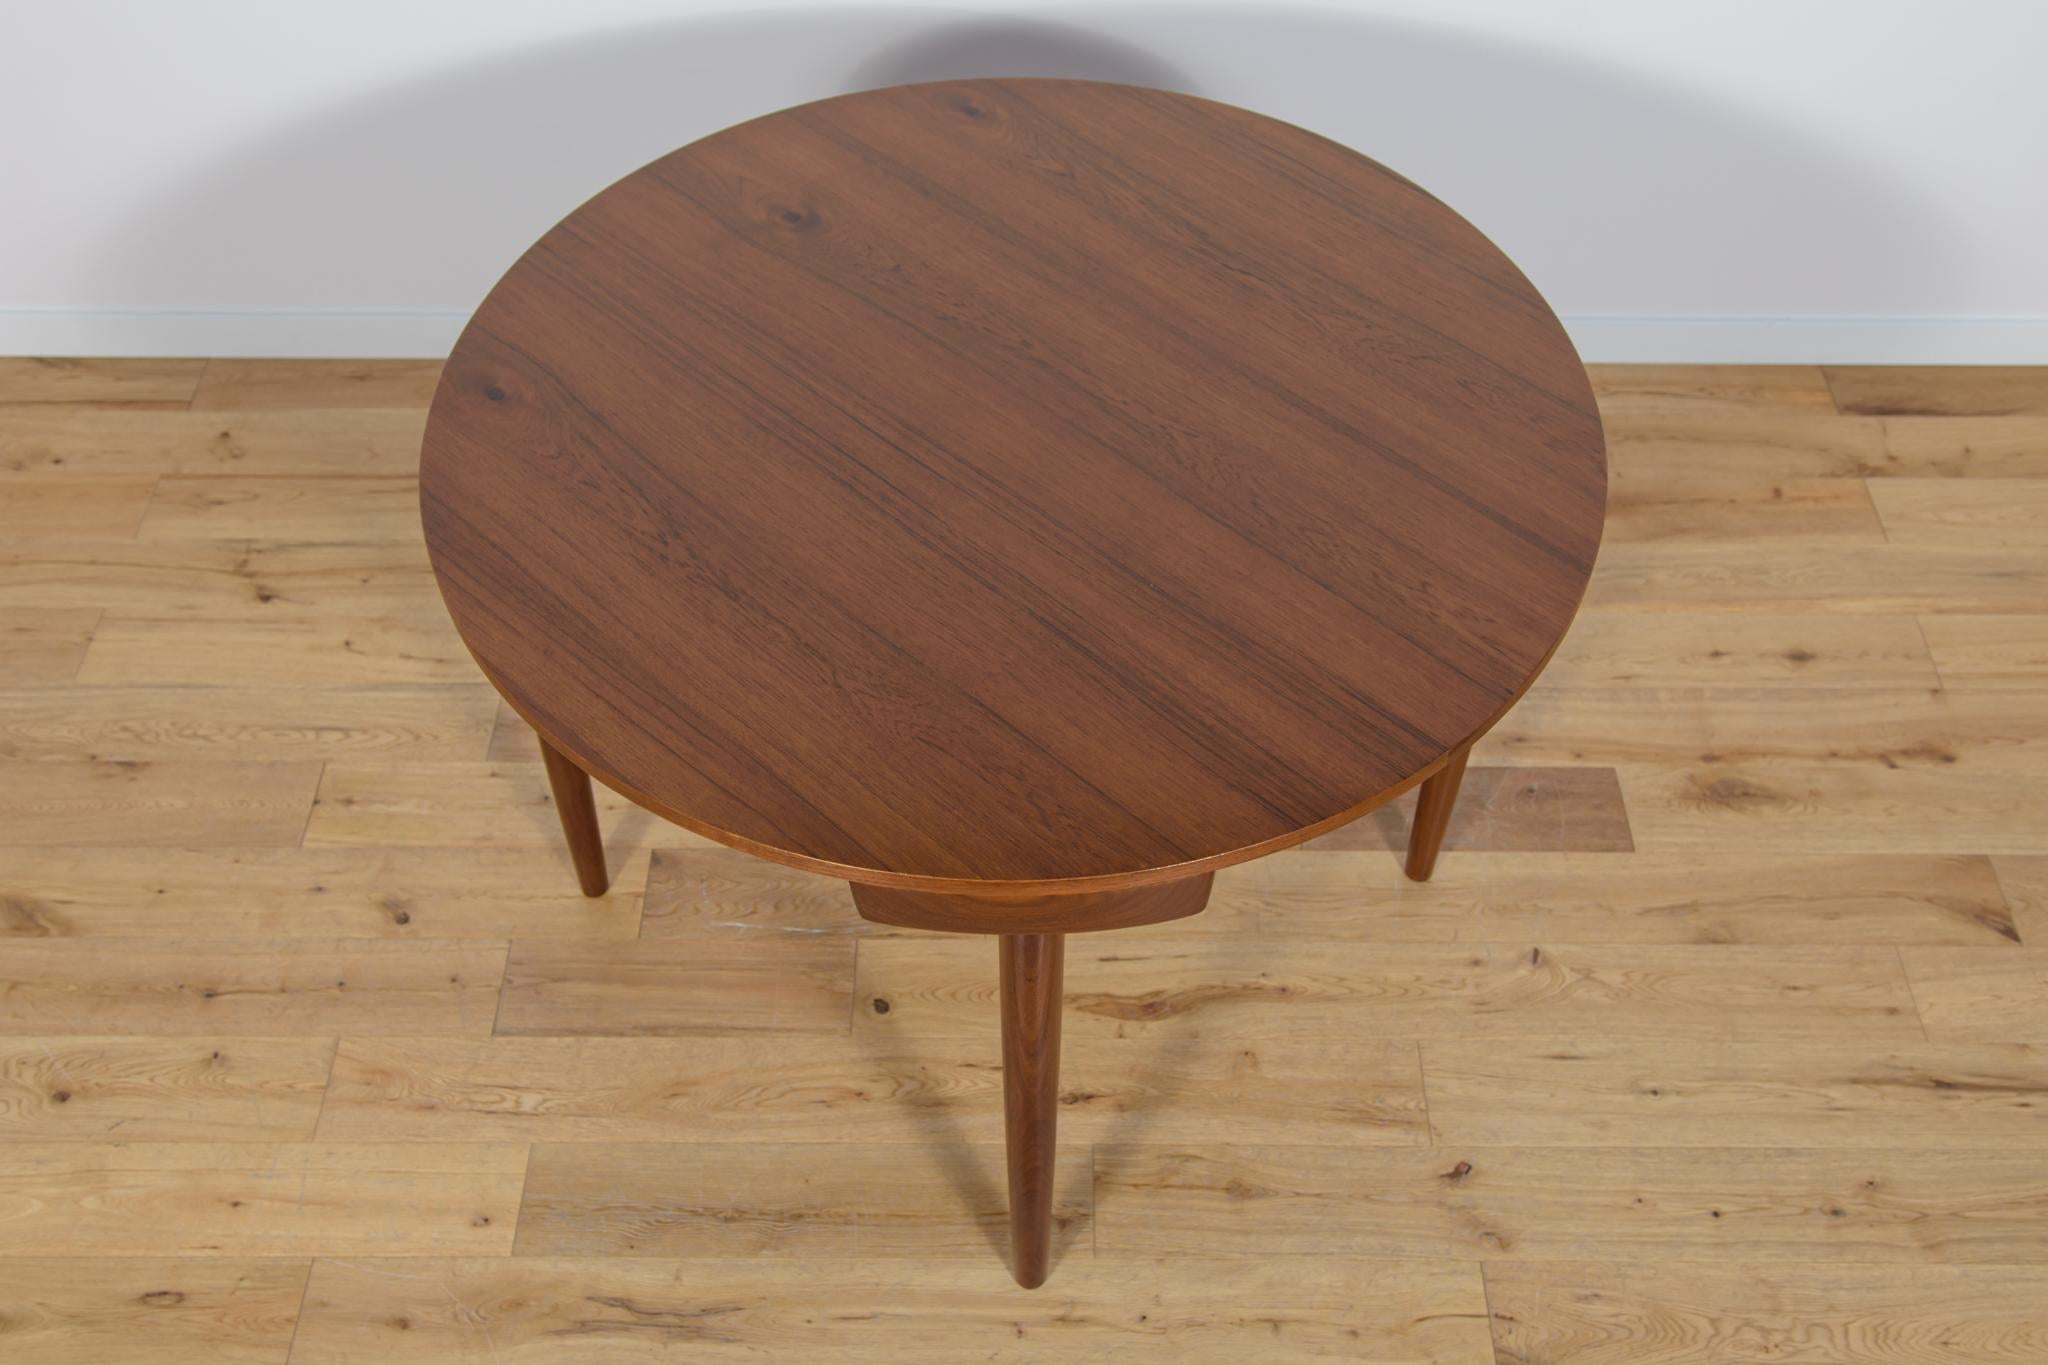 Leather Mid-Century Teak Dining Table and Chairs Set by Hans Olsen for Frem Røjle, 1950s For Sale